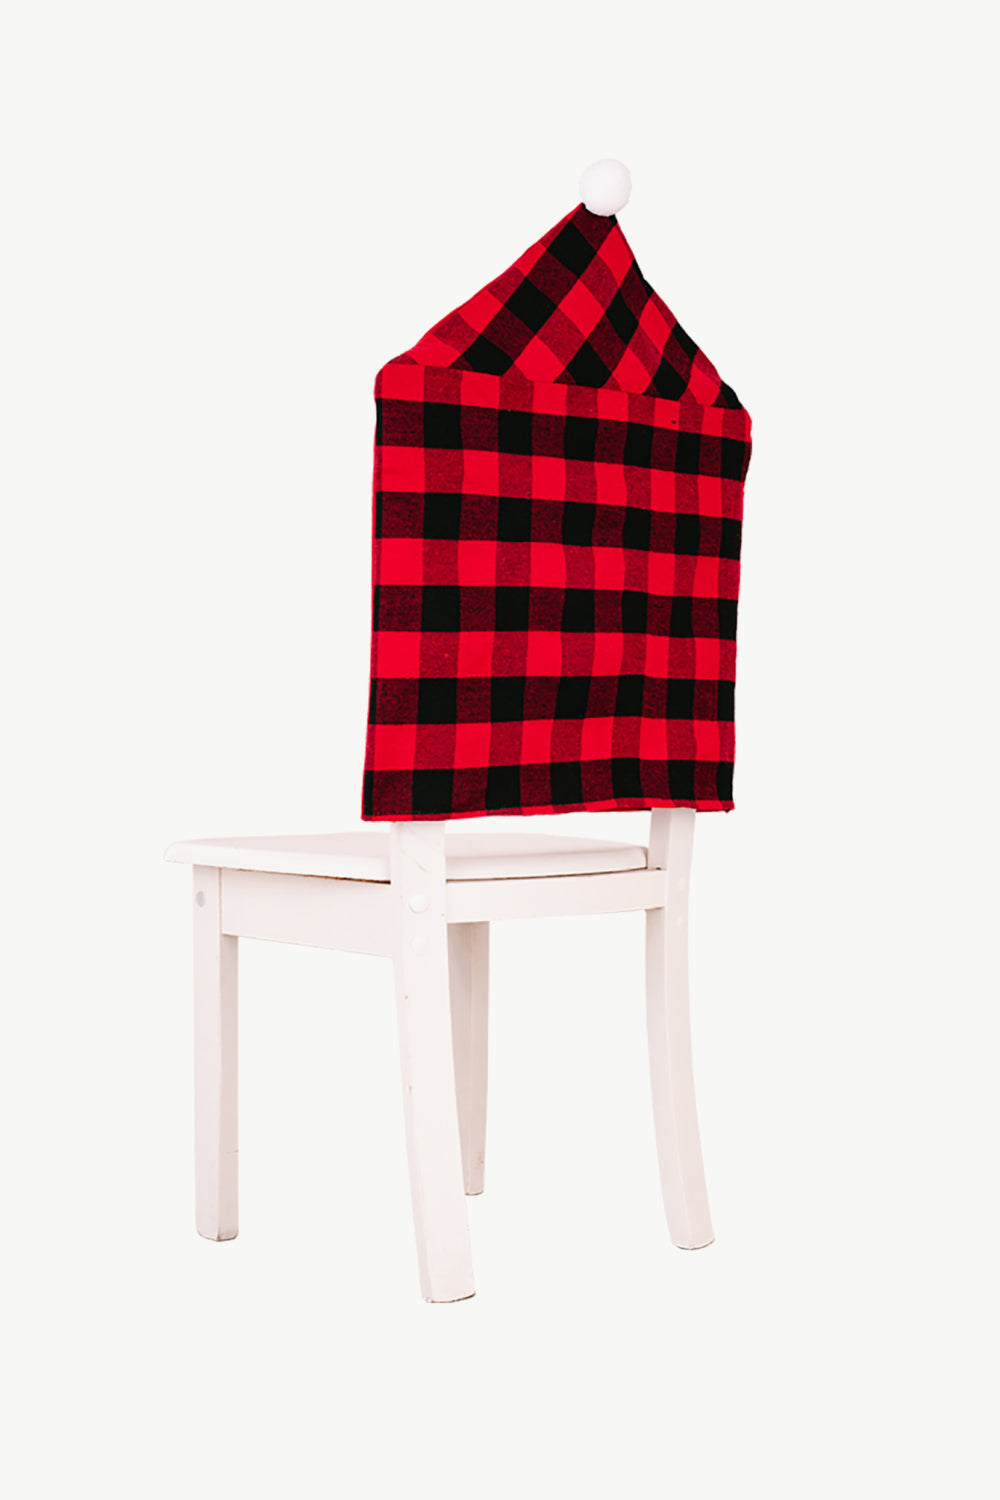 2-Pack Christmas Plaid Chair Covers